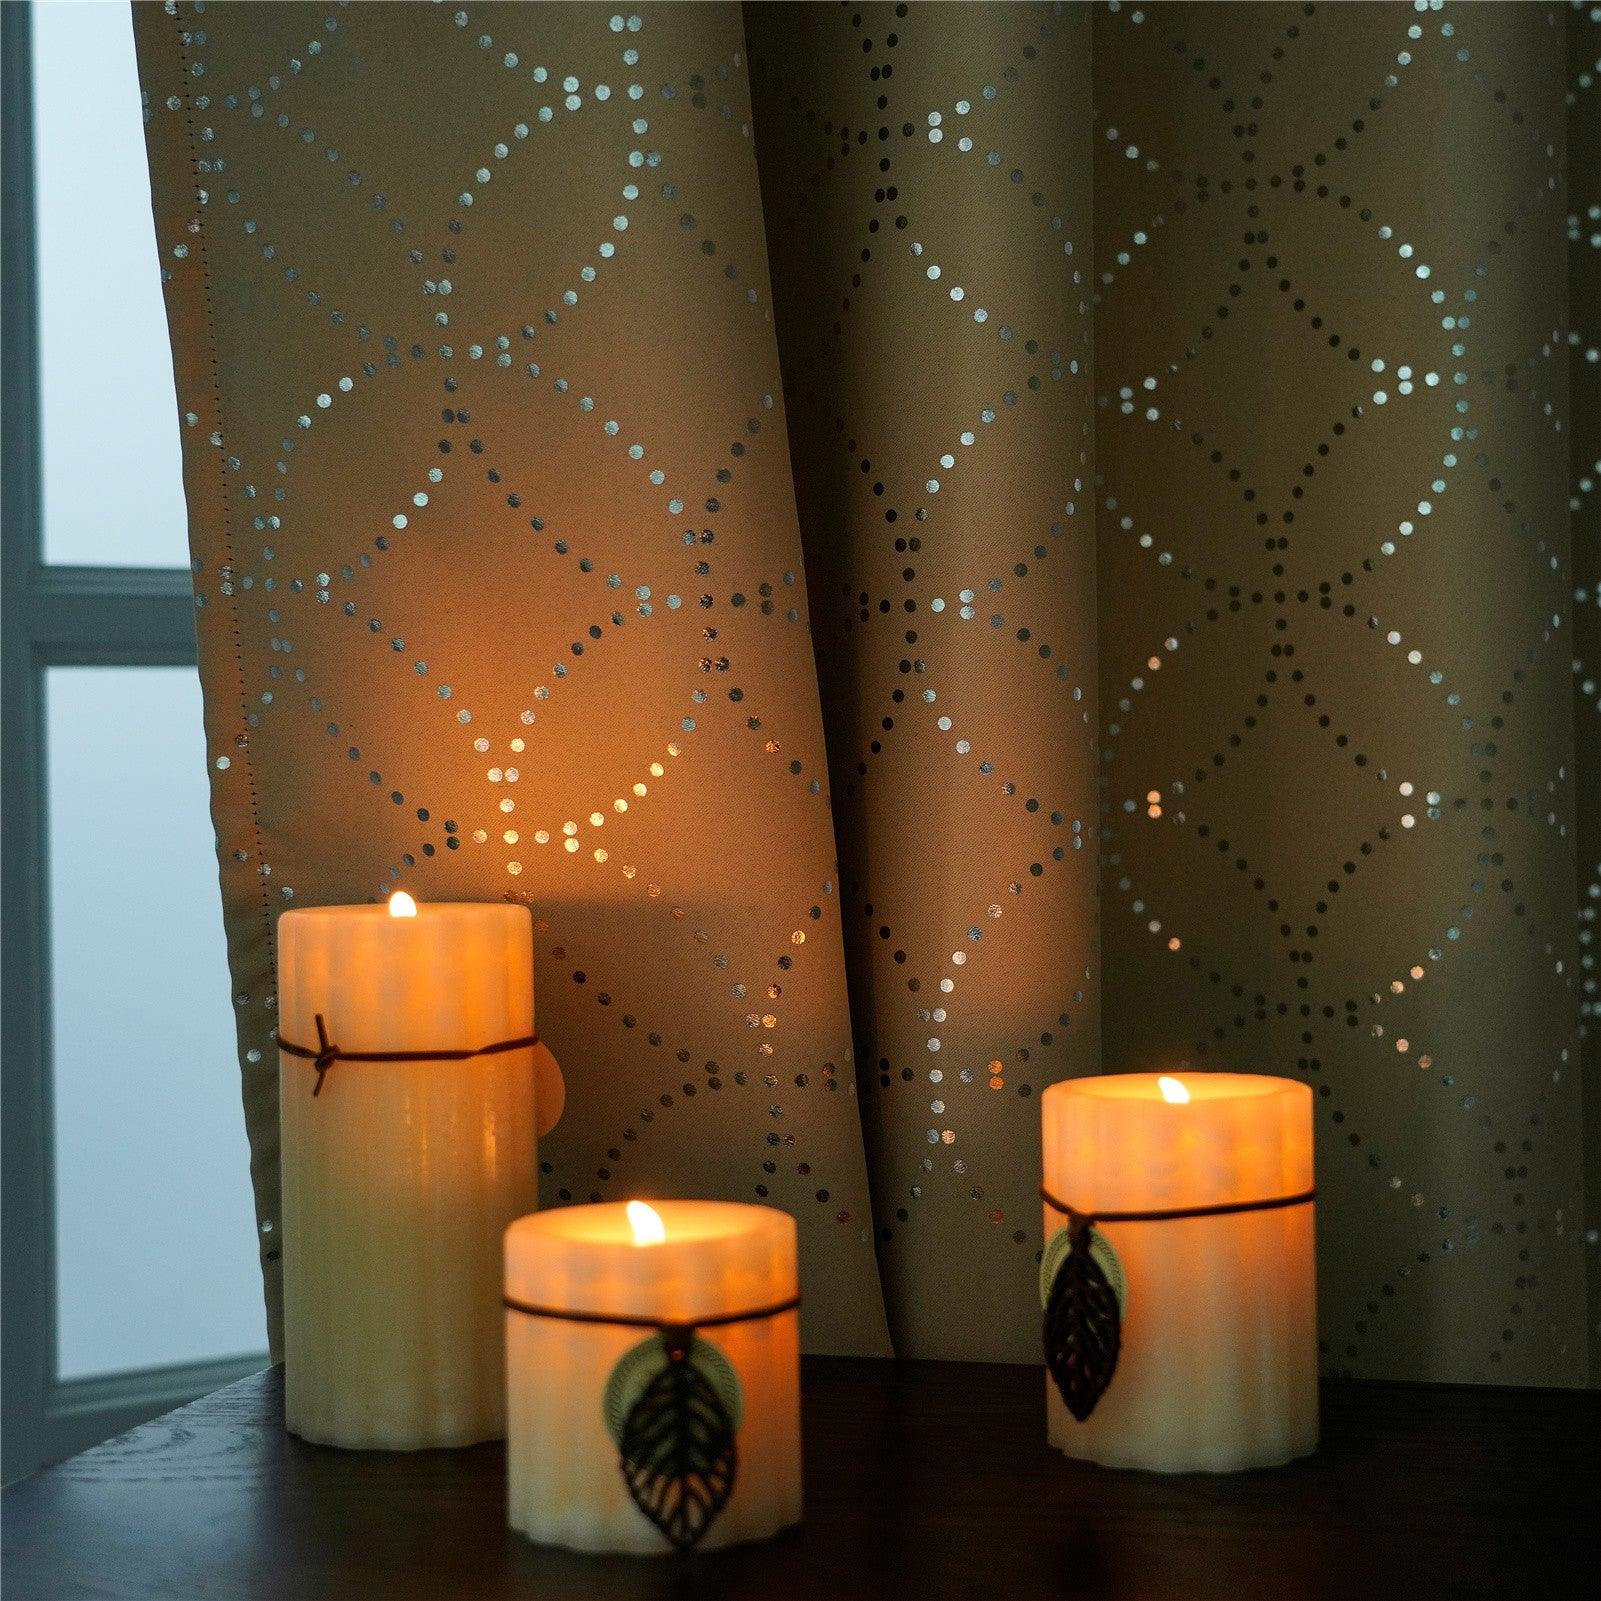 Custom Curtain-Thermal Blackout Drapes-Pongee Made Silver Foil Dots Printed  For Bedroom,1 Panel - Topfinel